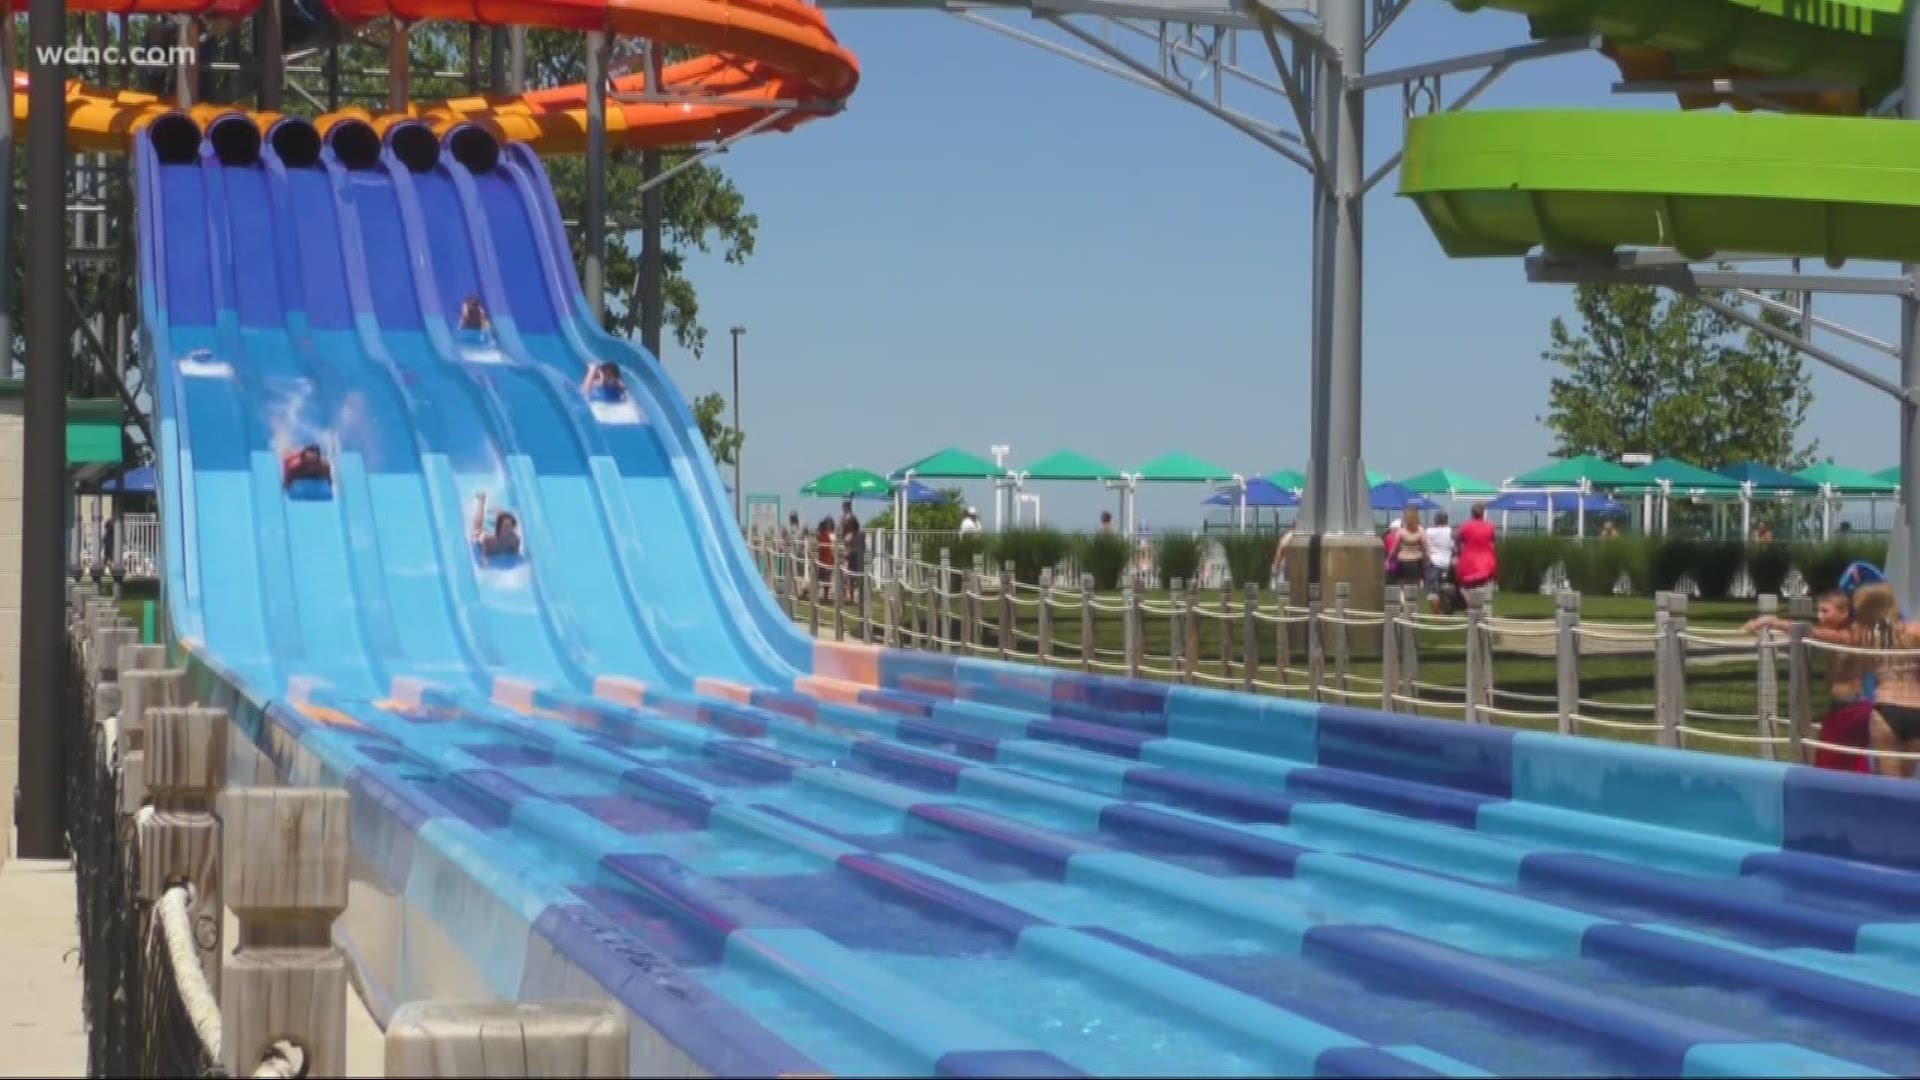 Carowinds is about to get a whole lot cooler. The Carolinas' largest theme park announced Thursday they will debut the Southeast's largest racing waterslide in the summer of 2020 at Carolina Harbor.